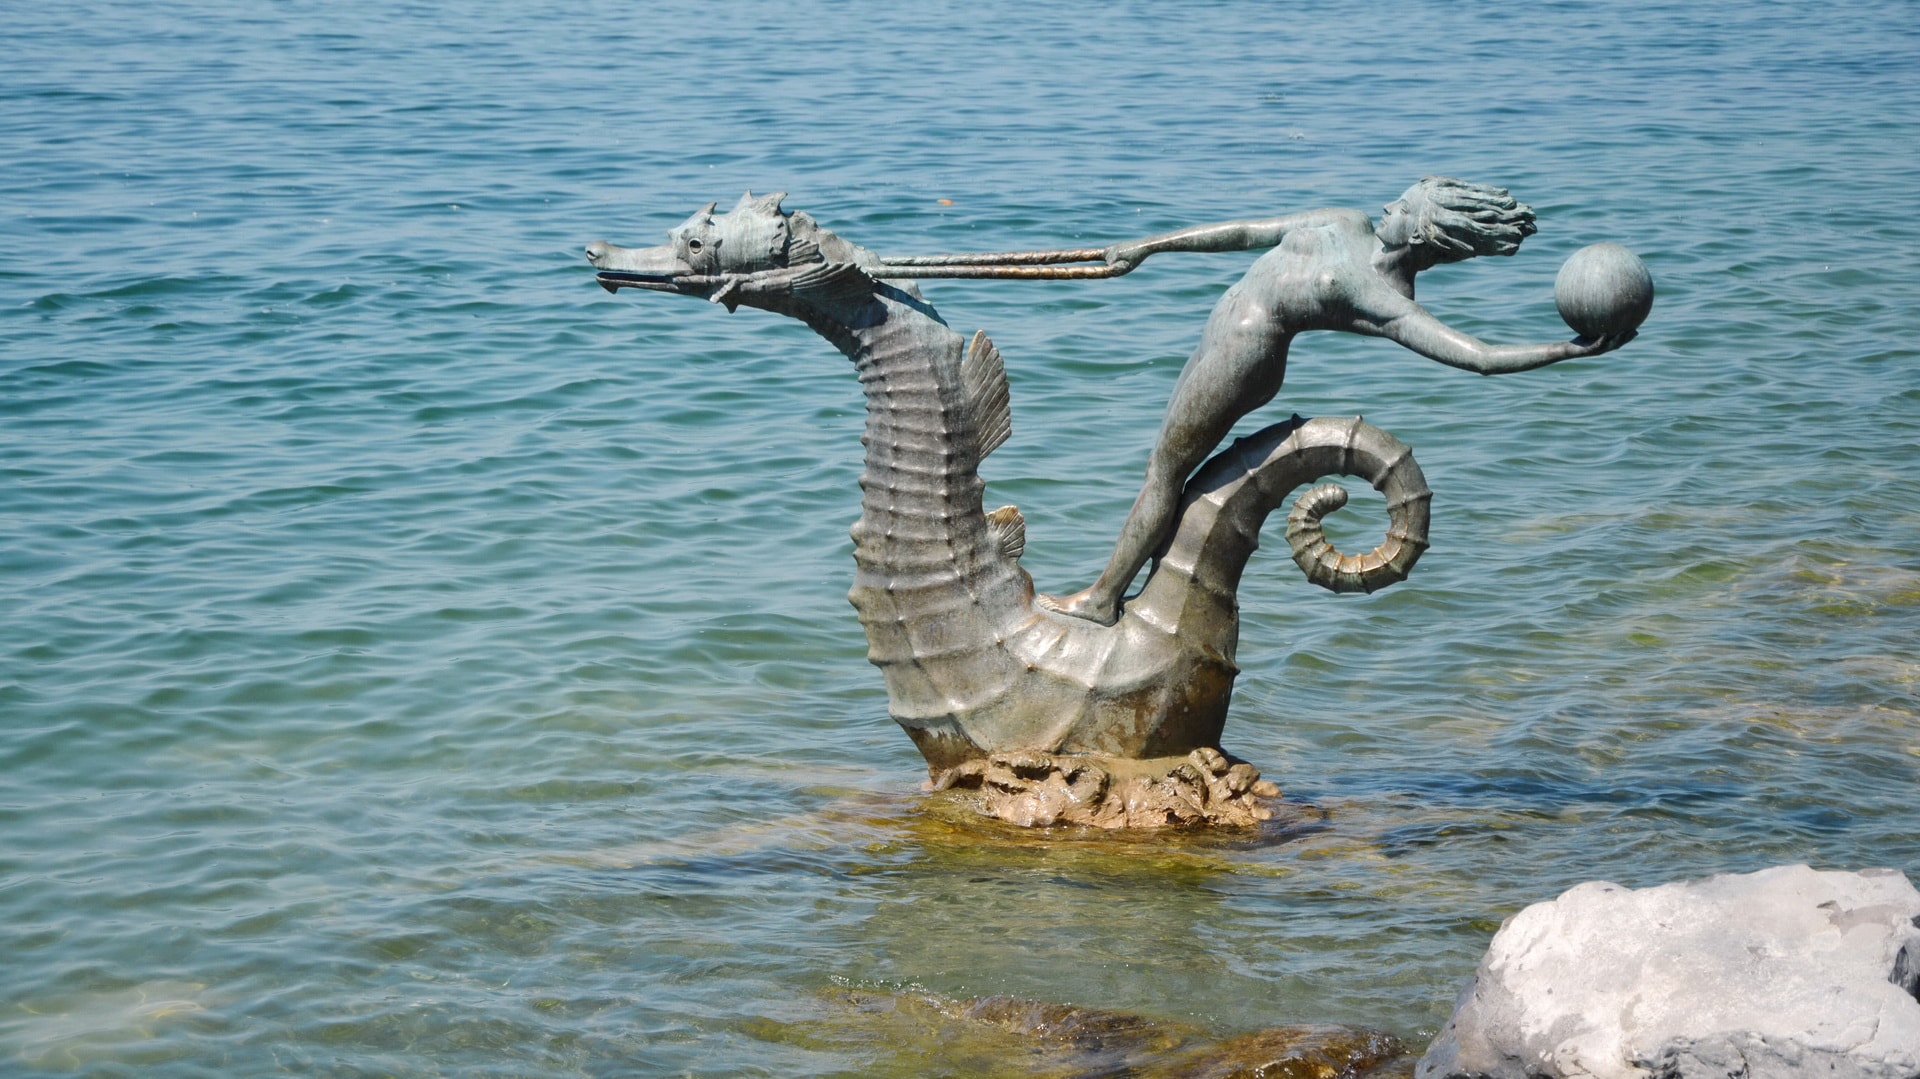 There are multiple sculptures along the shore in Vevey